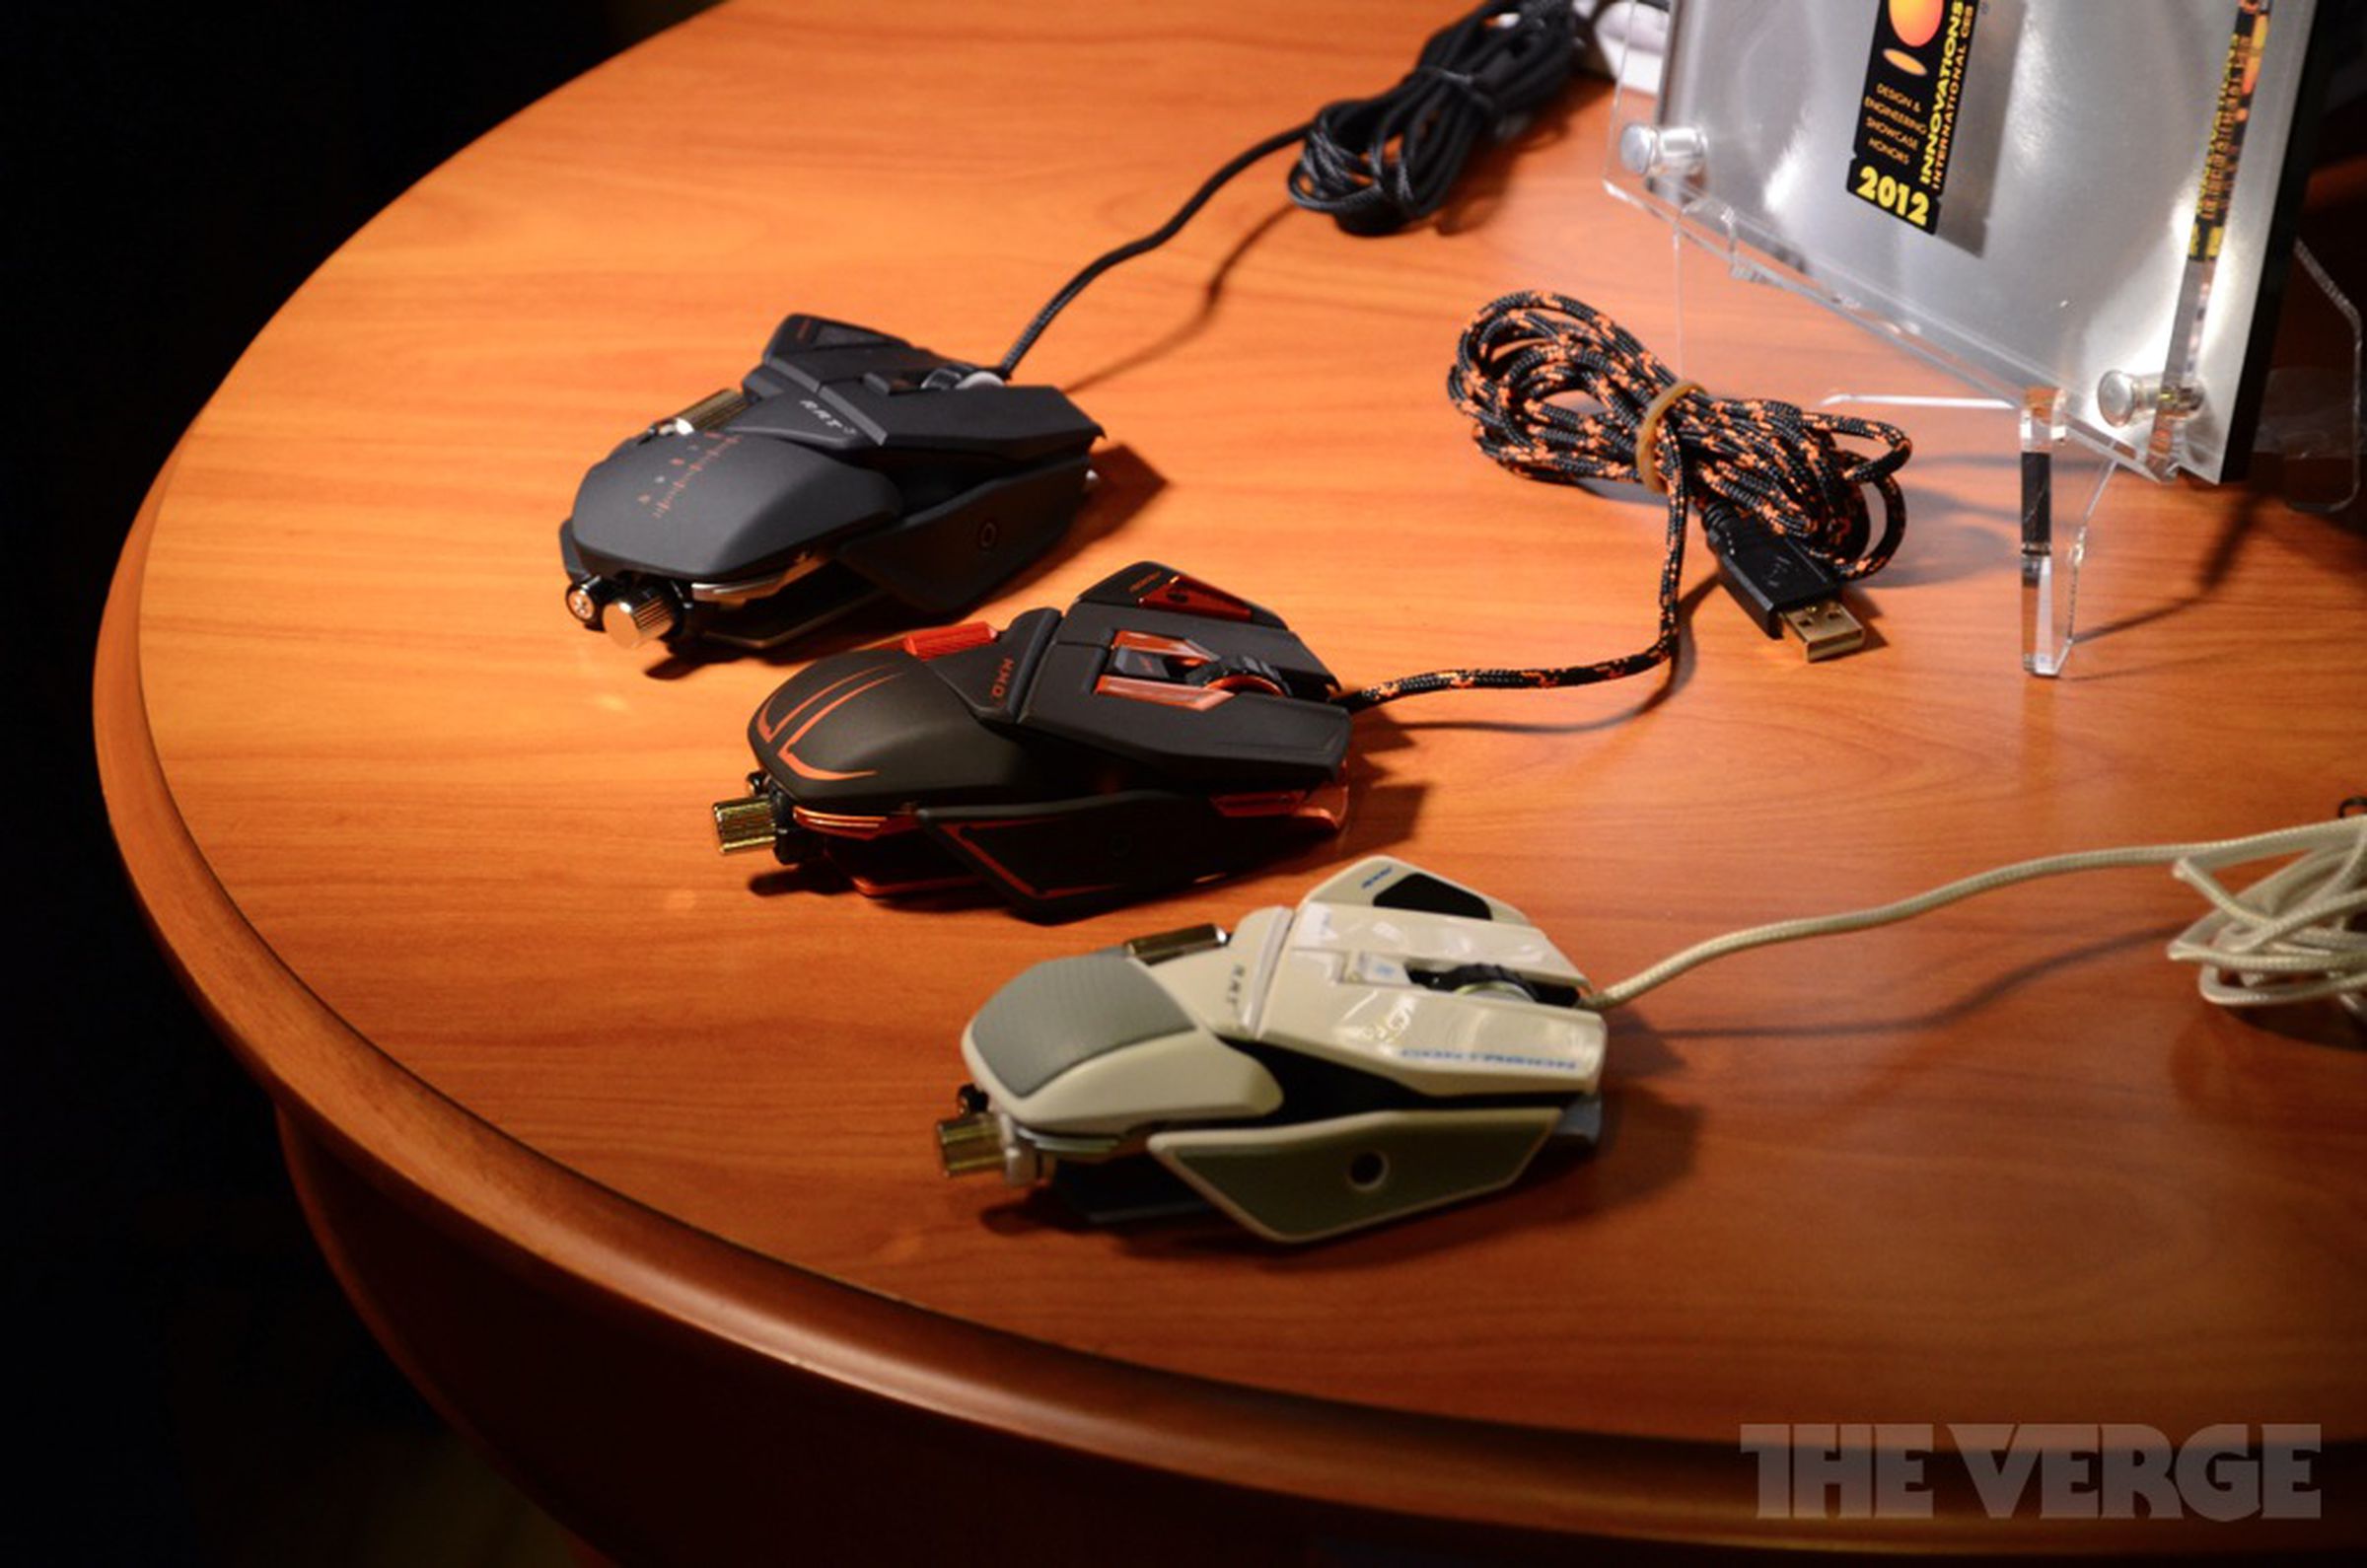 Mad Catz Cyborg Freq 5 headset, MMO7 mouse, and Street Fighter x Tekken Arcade FightStick VS hands-on pictures